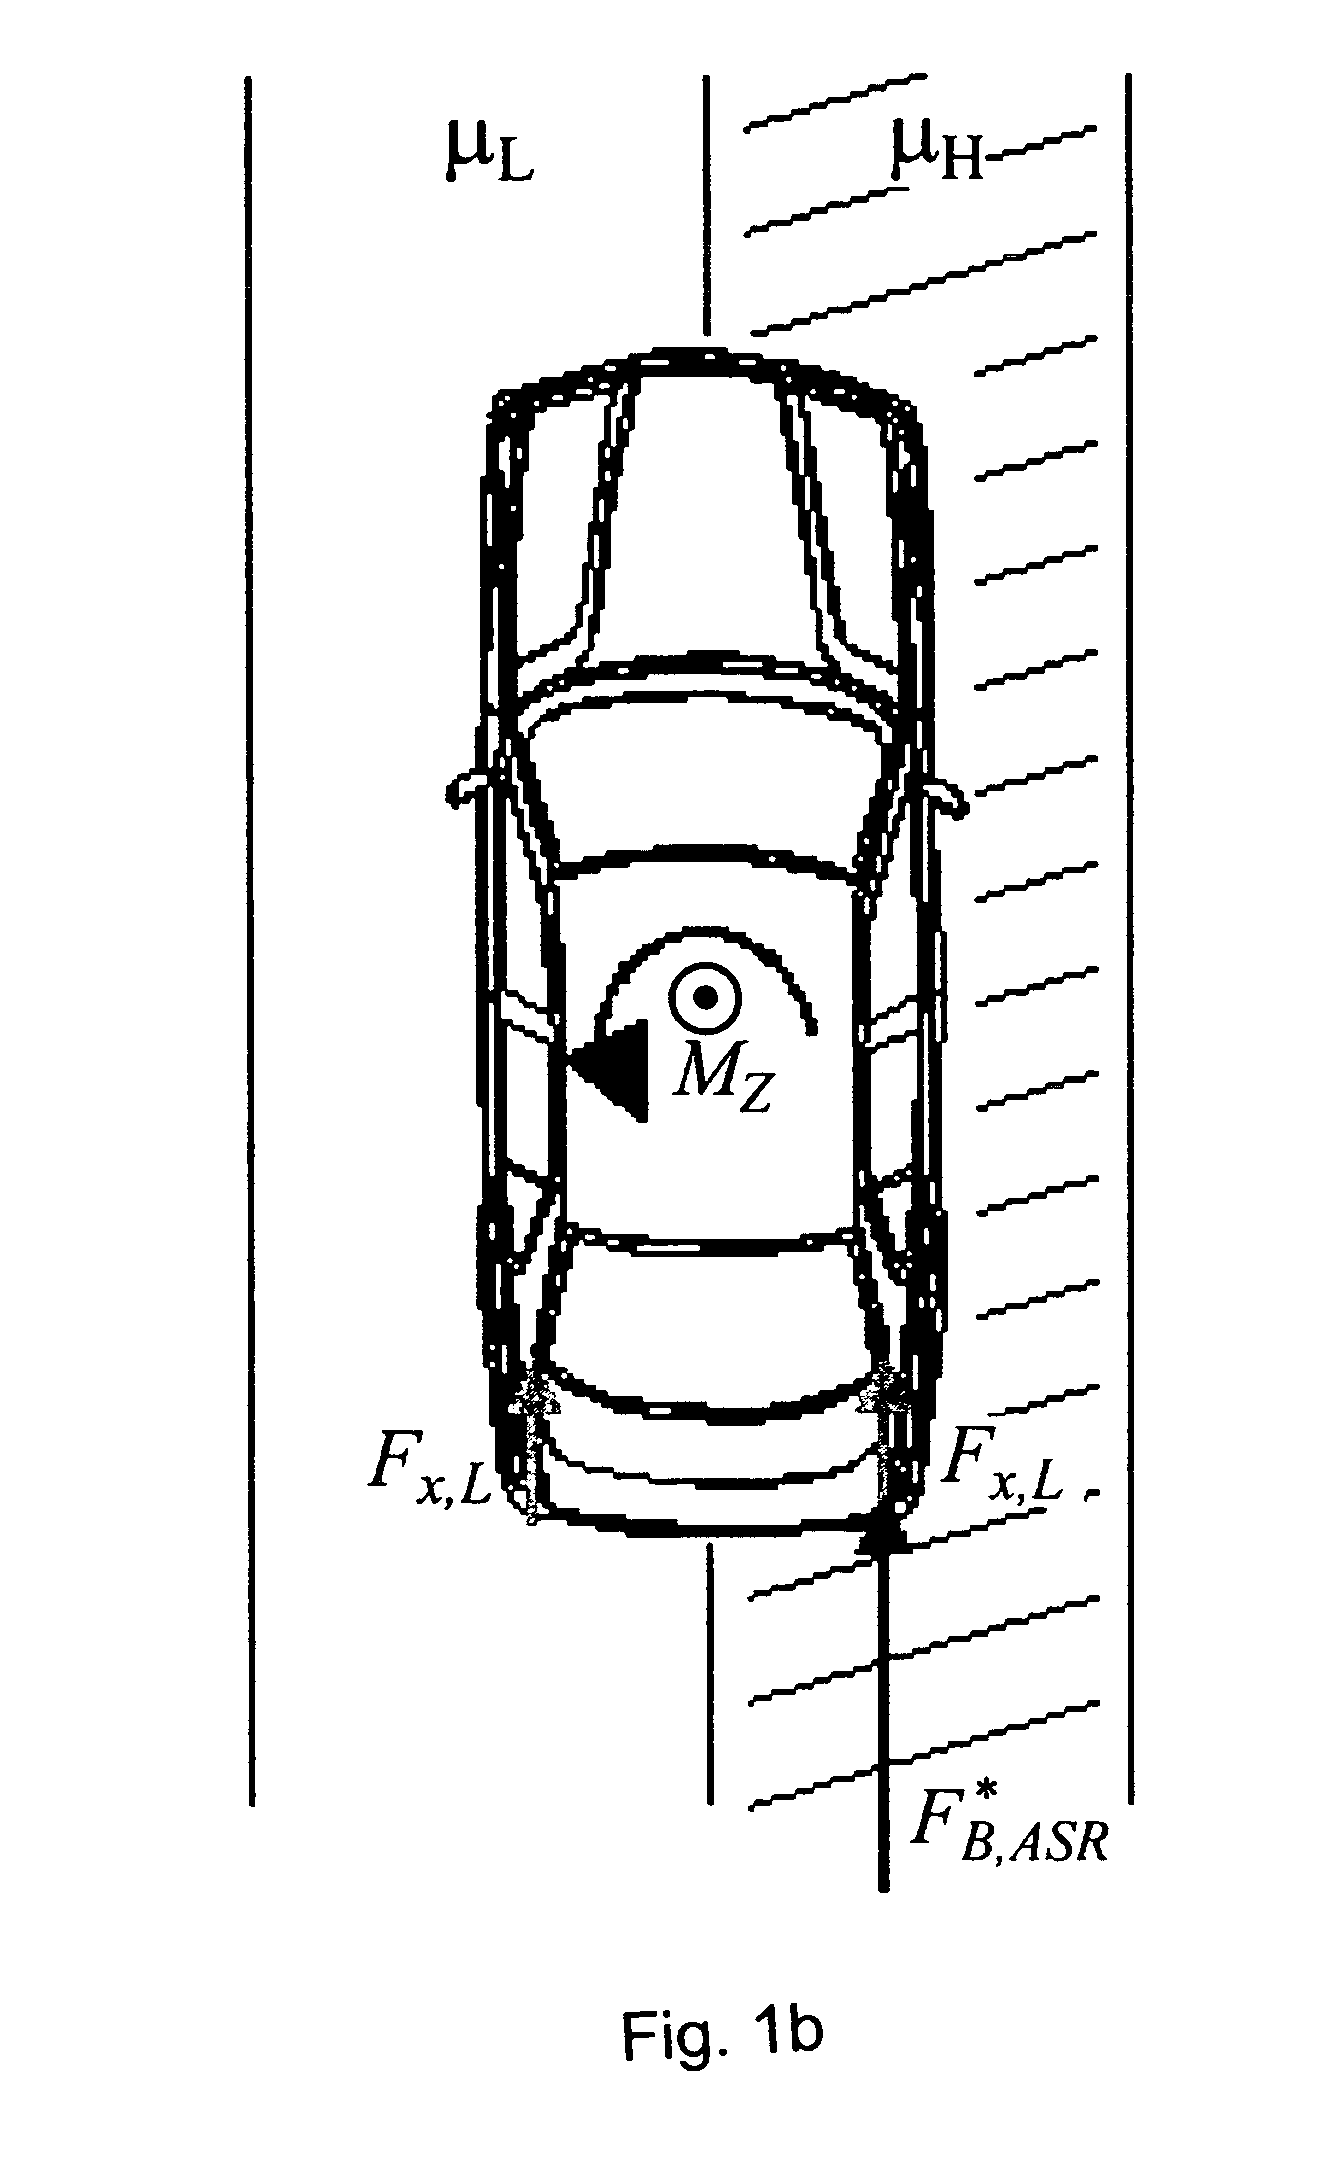 Method for Increasing the Driving Stability of a Motor Vehicle